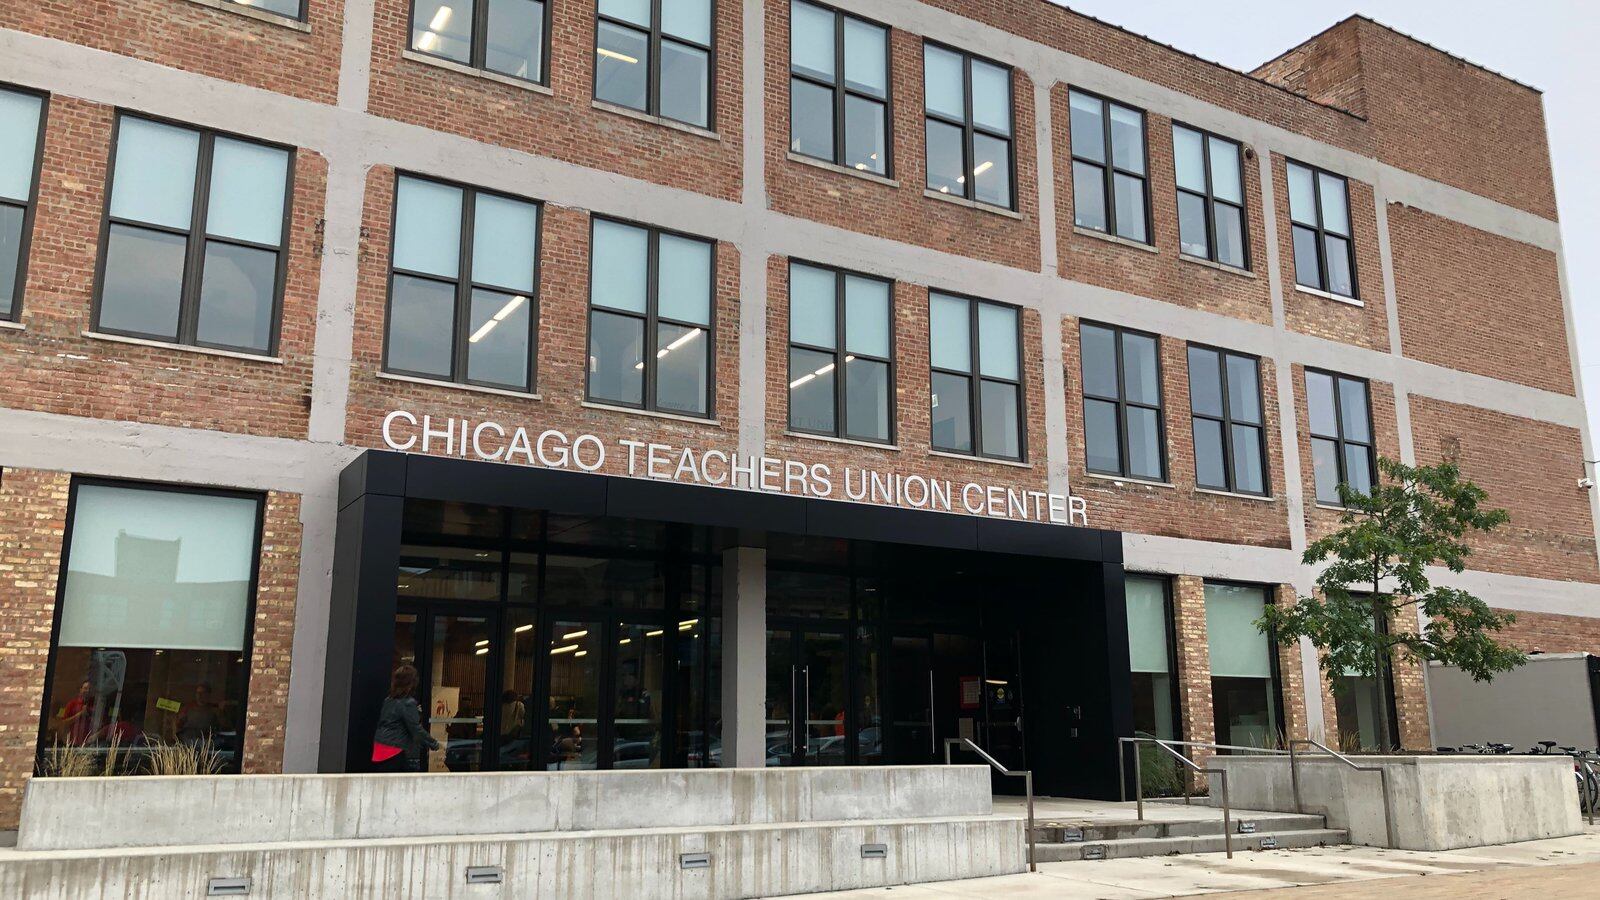 The headquarters of Chicago Teachers Union sit on Chicago’s Near West Side.